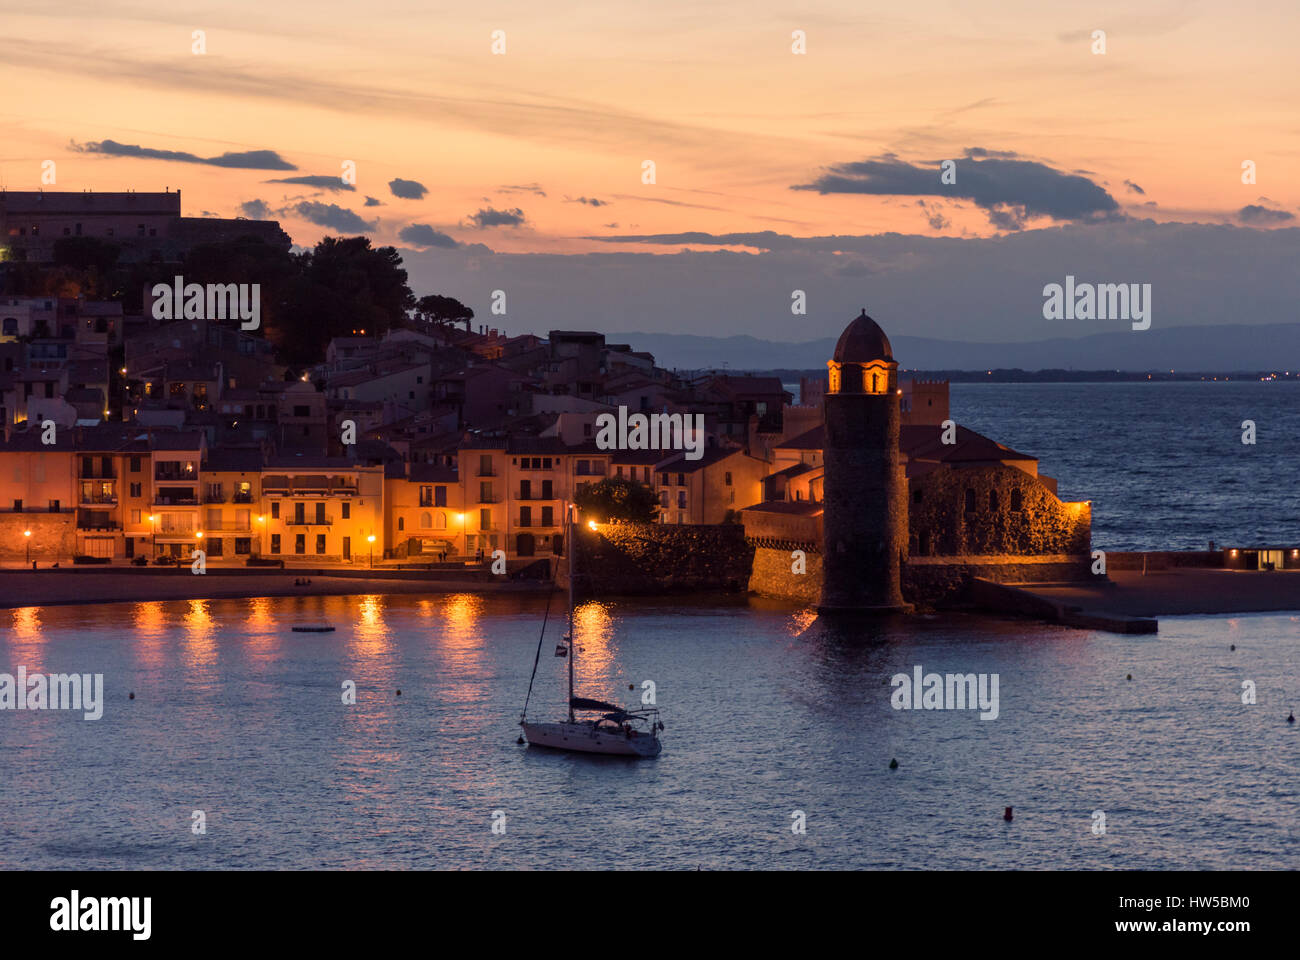 Night view of the town waterfront and bell tower of the Church Notre Dame des Anges, Collioure, Côte Vermeille, France Stock Photo